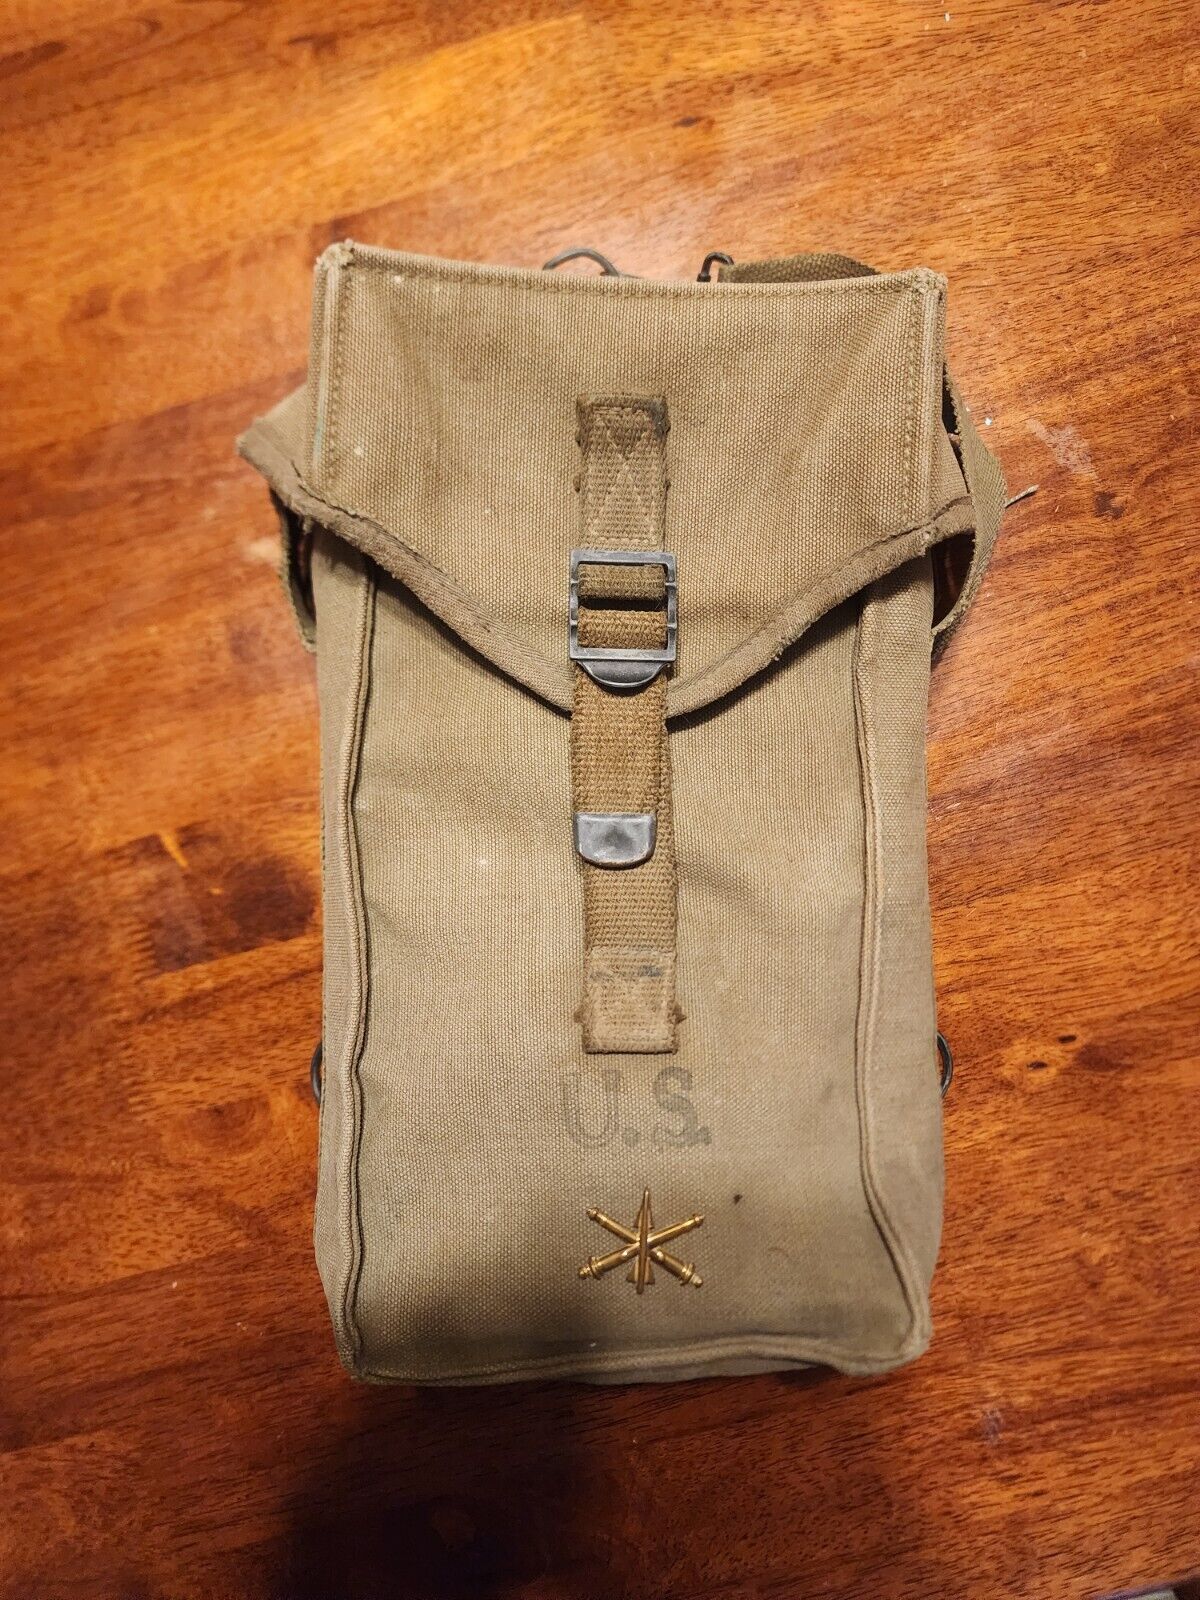  WW2 1945 US ARMY Air Defence Artillery GENERAL M1 PURPOSE AMMO BAG POUCH